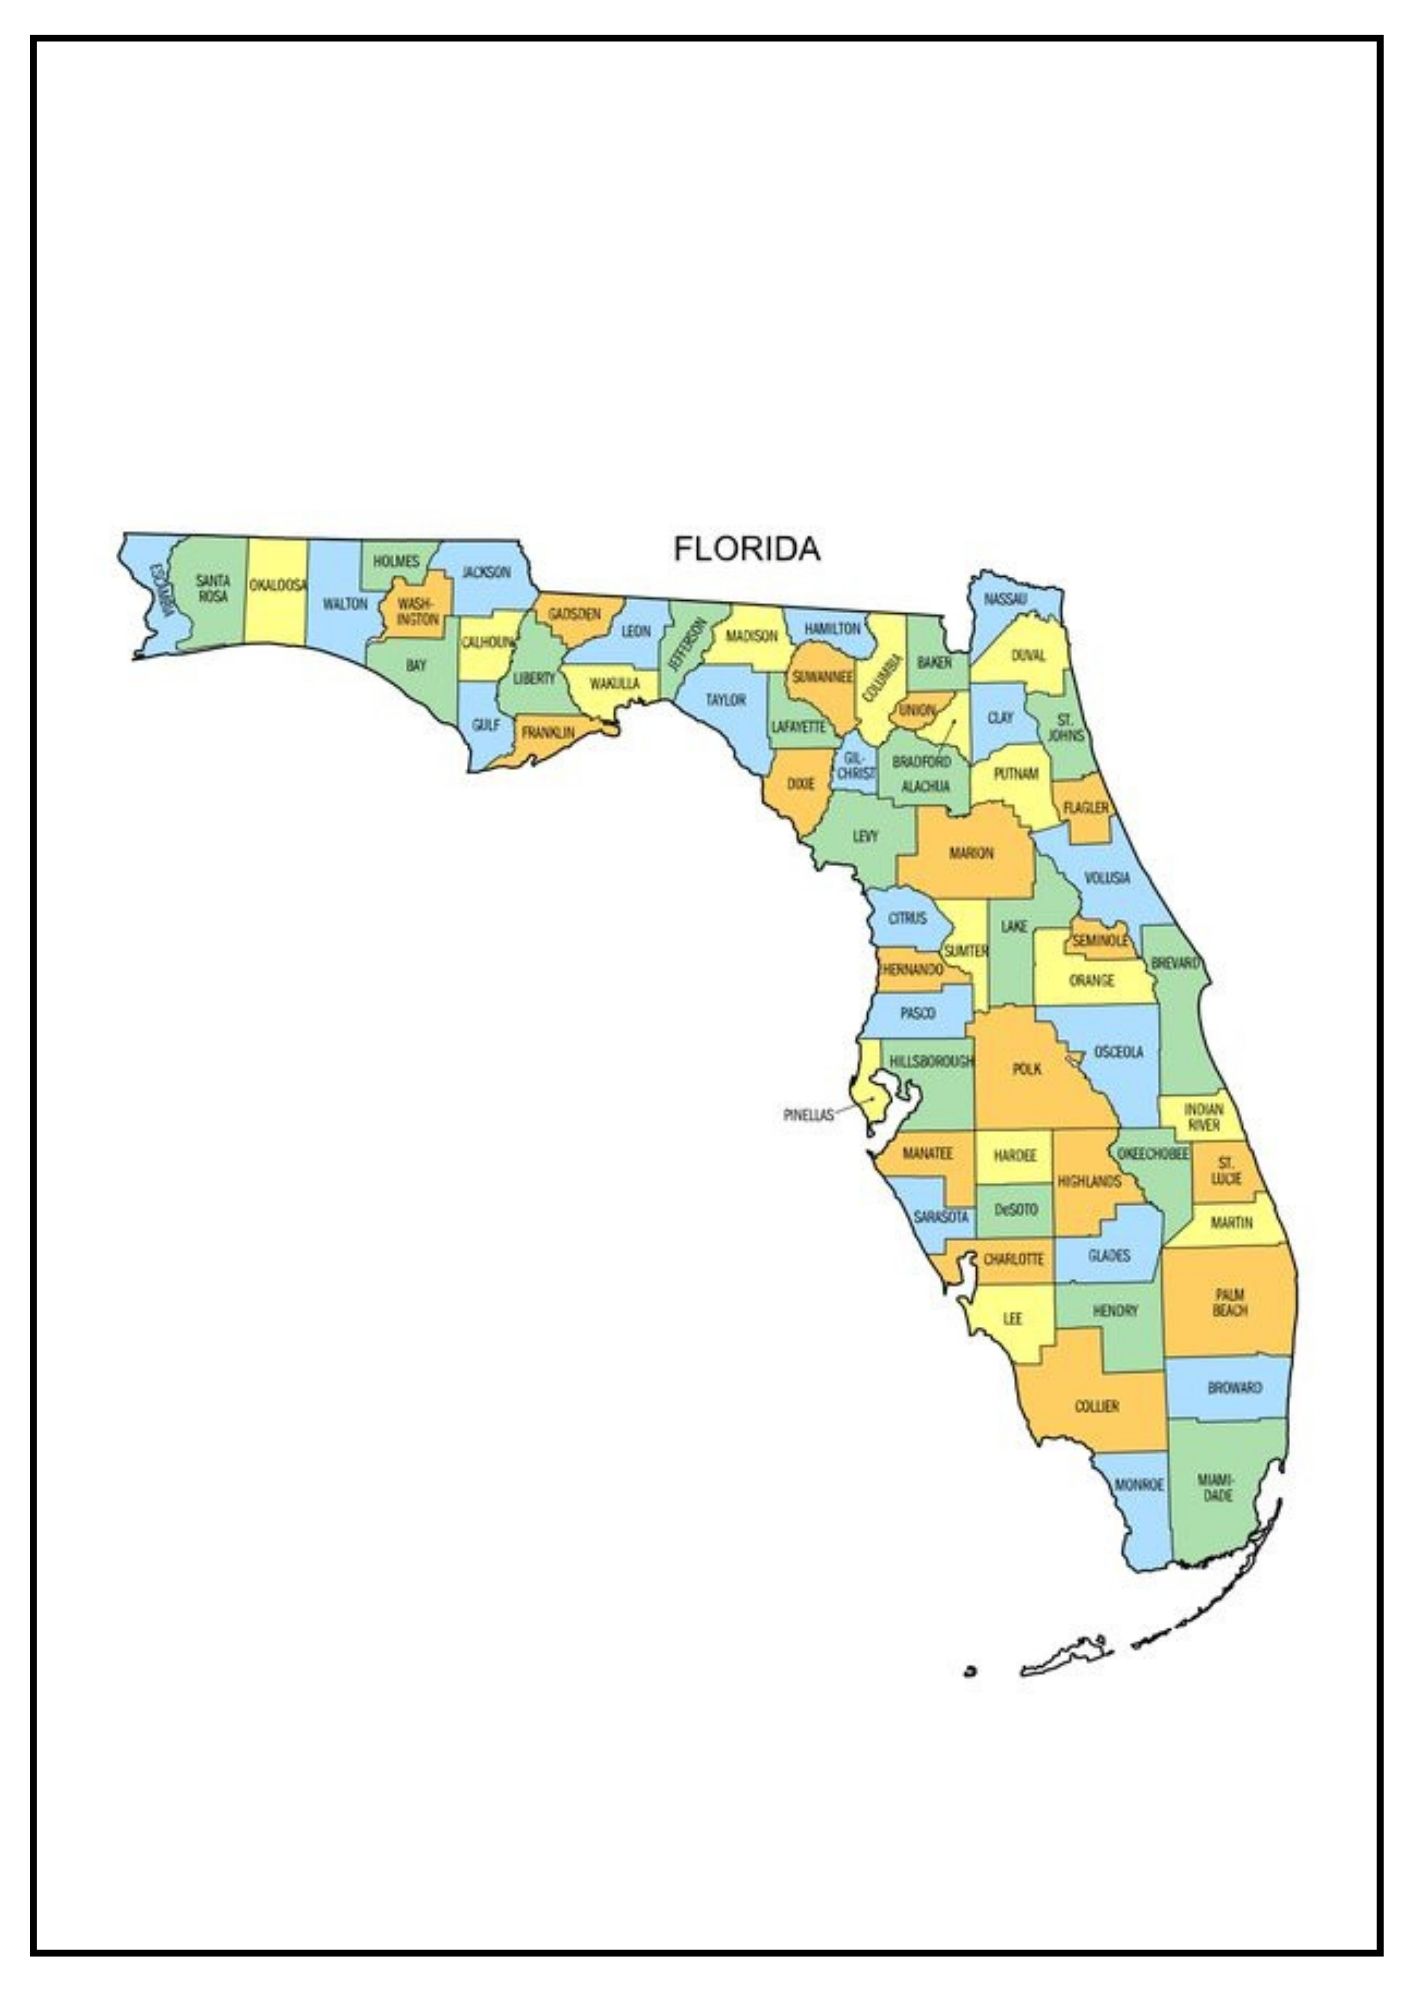 Florida County Map [Map of FL Counties and Cities]